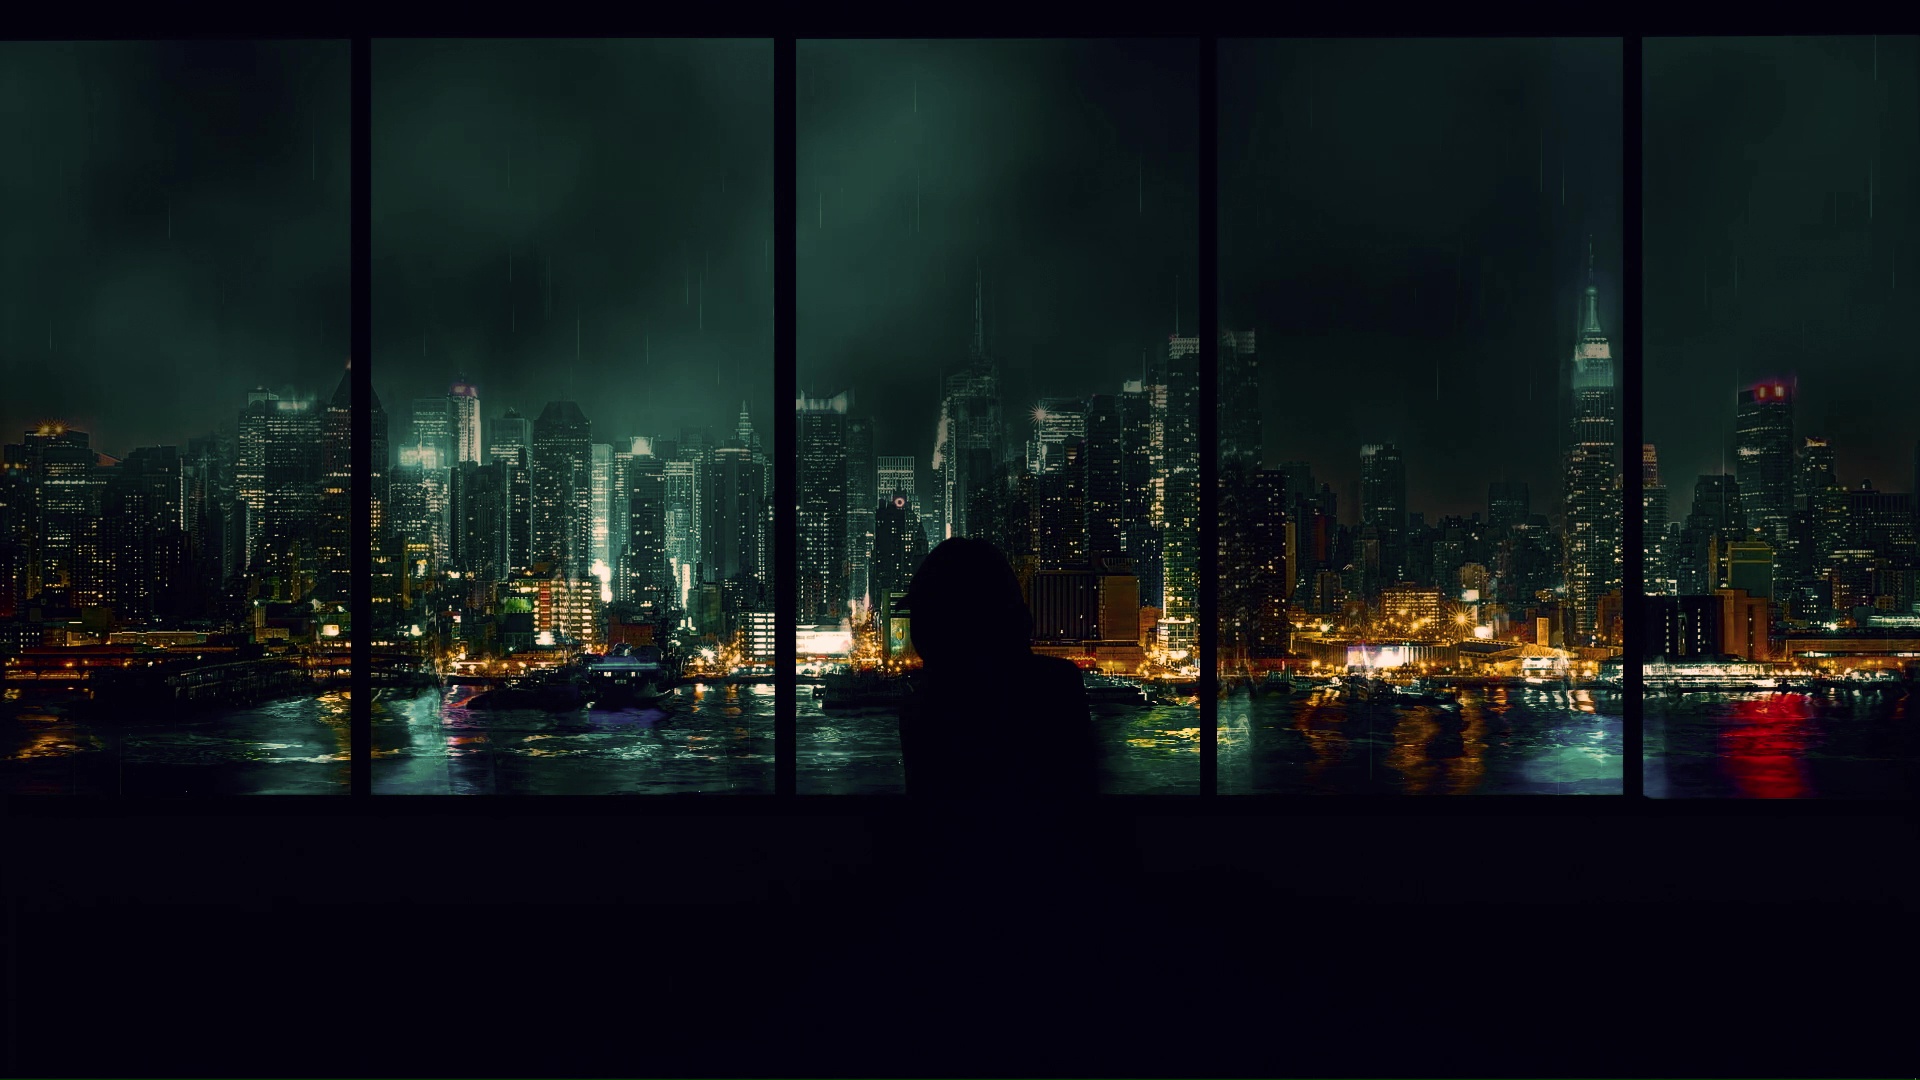 Live Wallpaper Rainy Night City for Desktop  Mac, Laptop with different re...